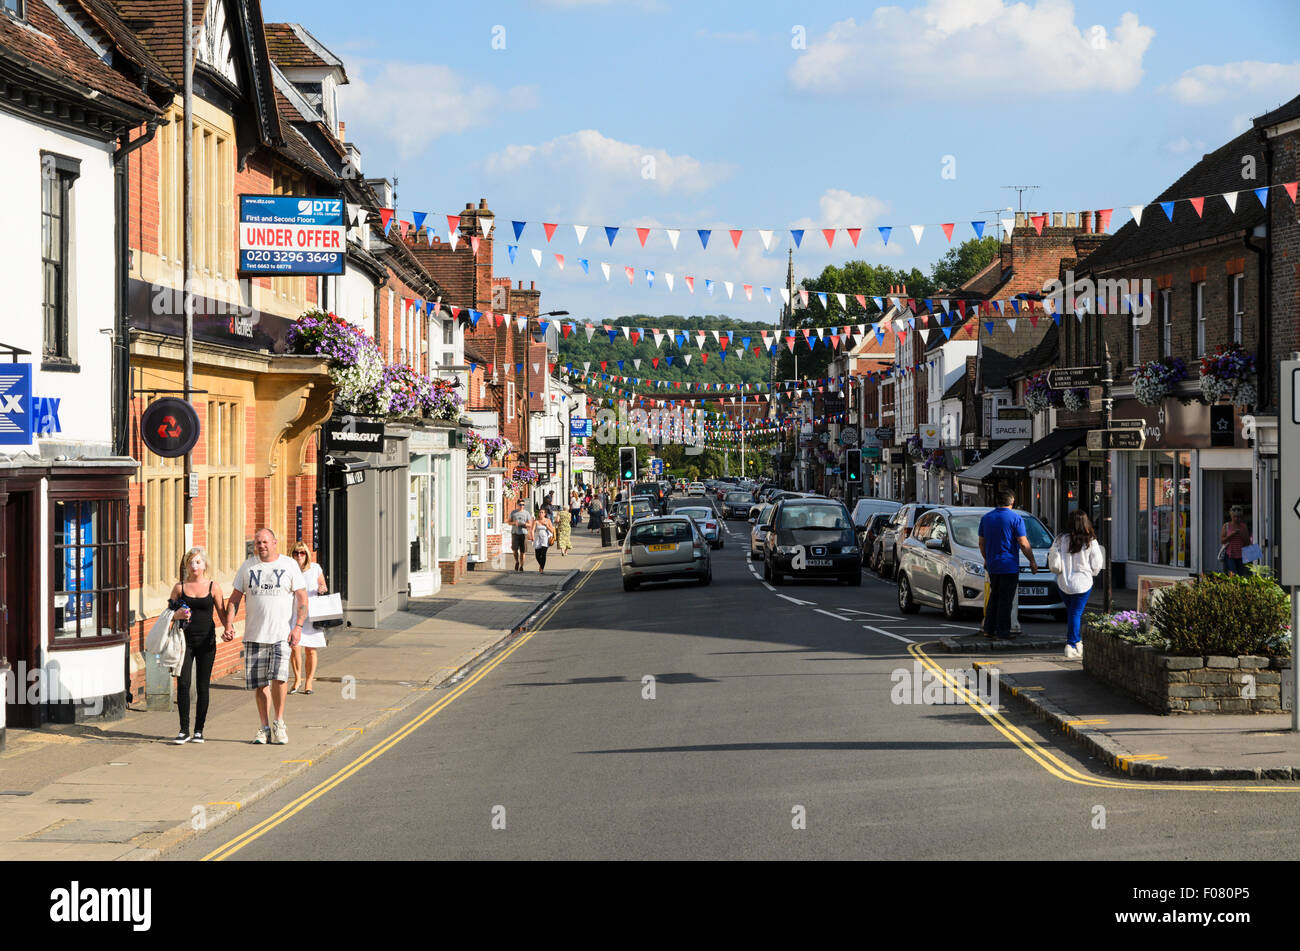 La High Street, West Wycombe, Buckinghamshire, Angleterre, Royaume-Uni. Banque D'Images